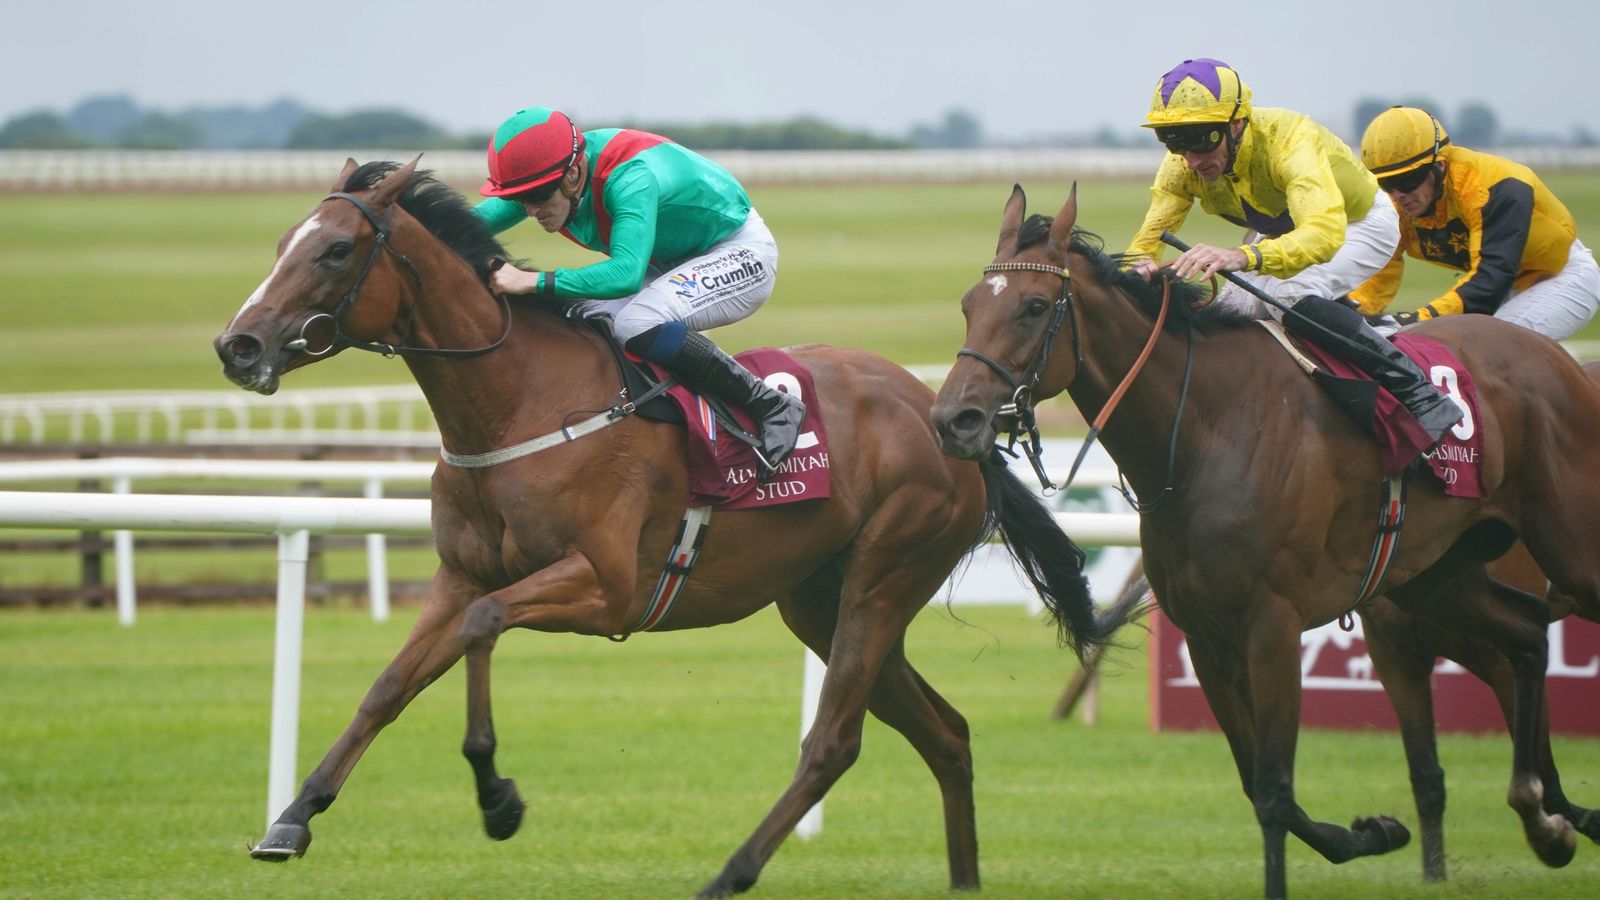 La Petite Coco and Billy Lee claim Group One win in Pretty Polly Stakes at the Curragh